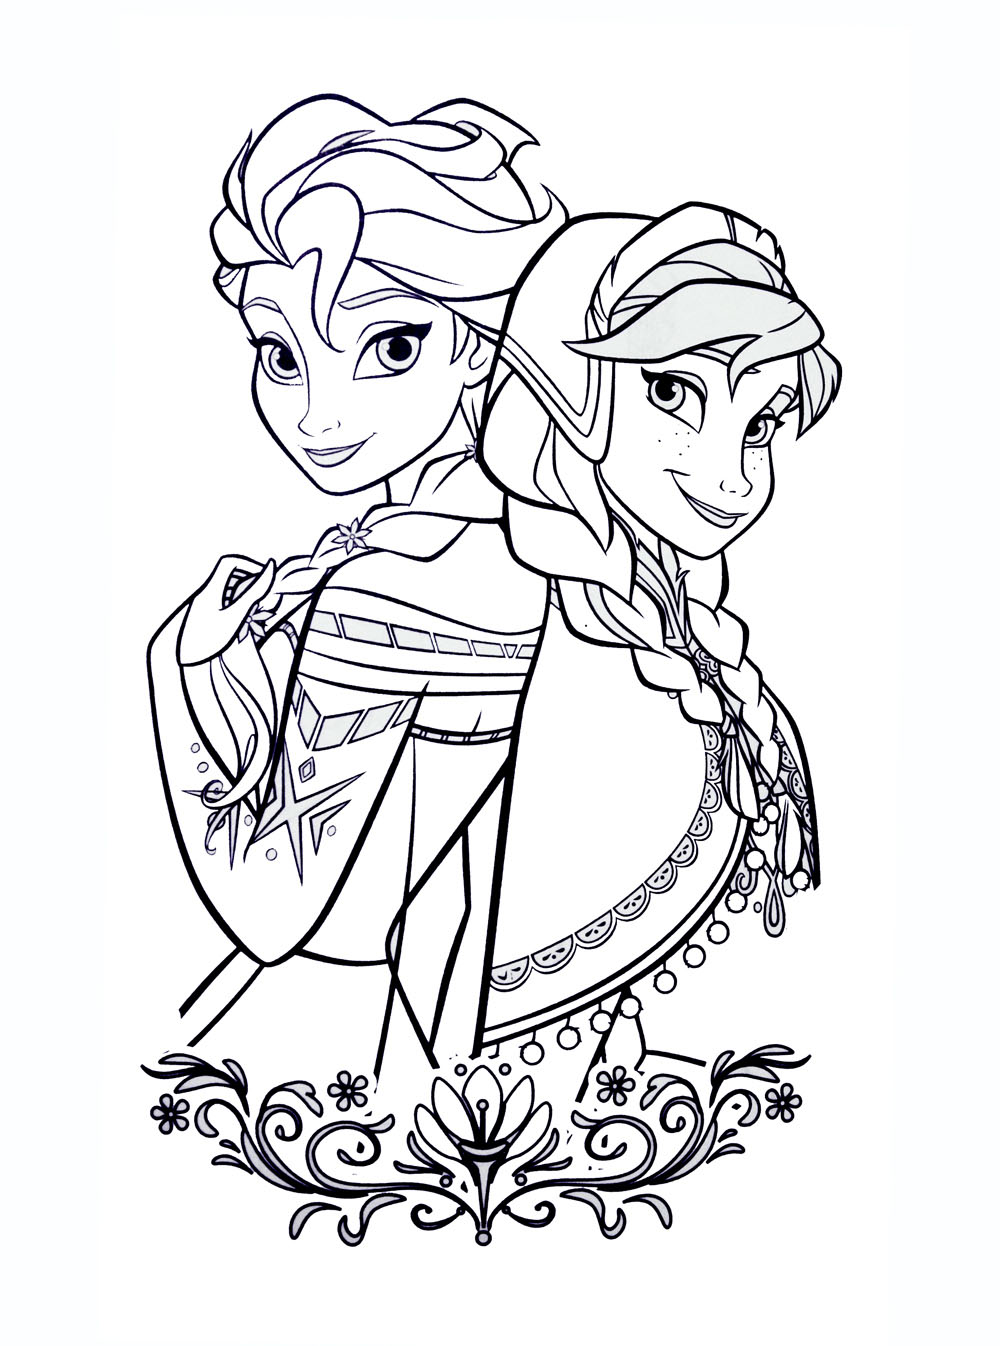 Frozen - Free printable Coloring pages for kids